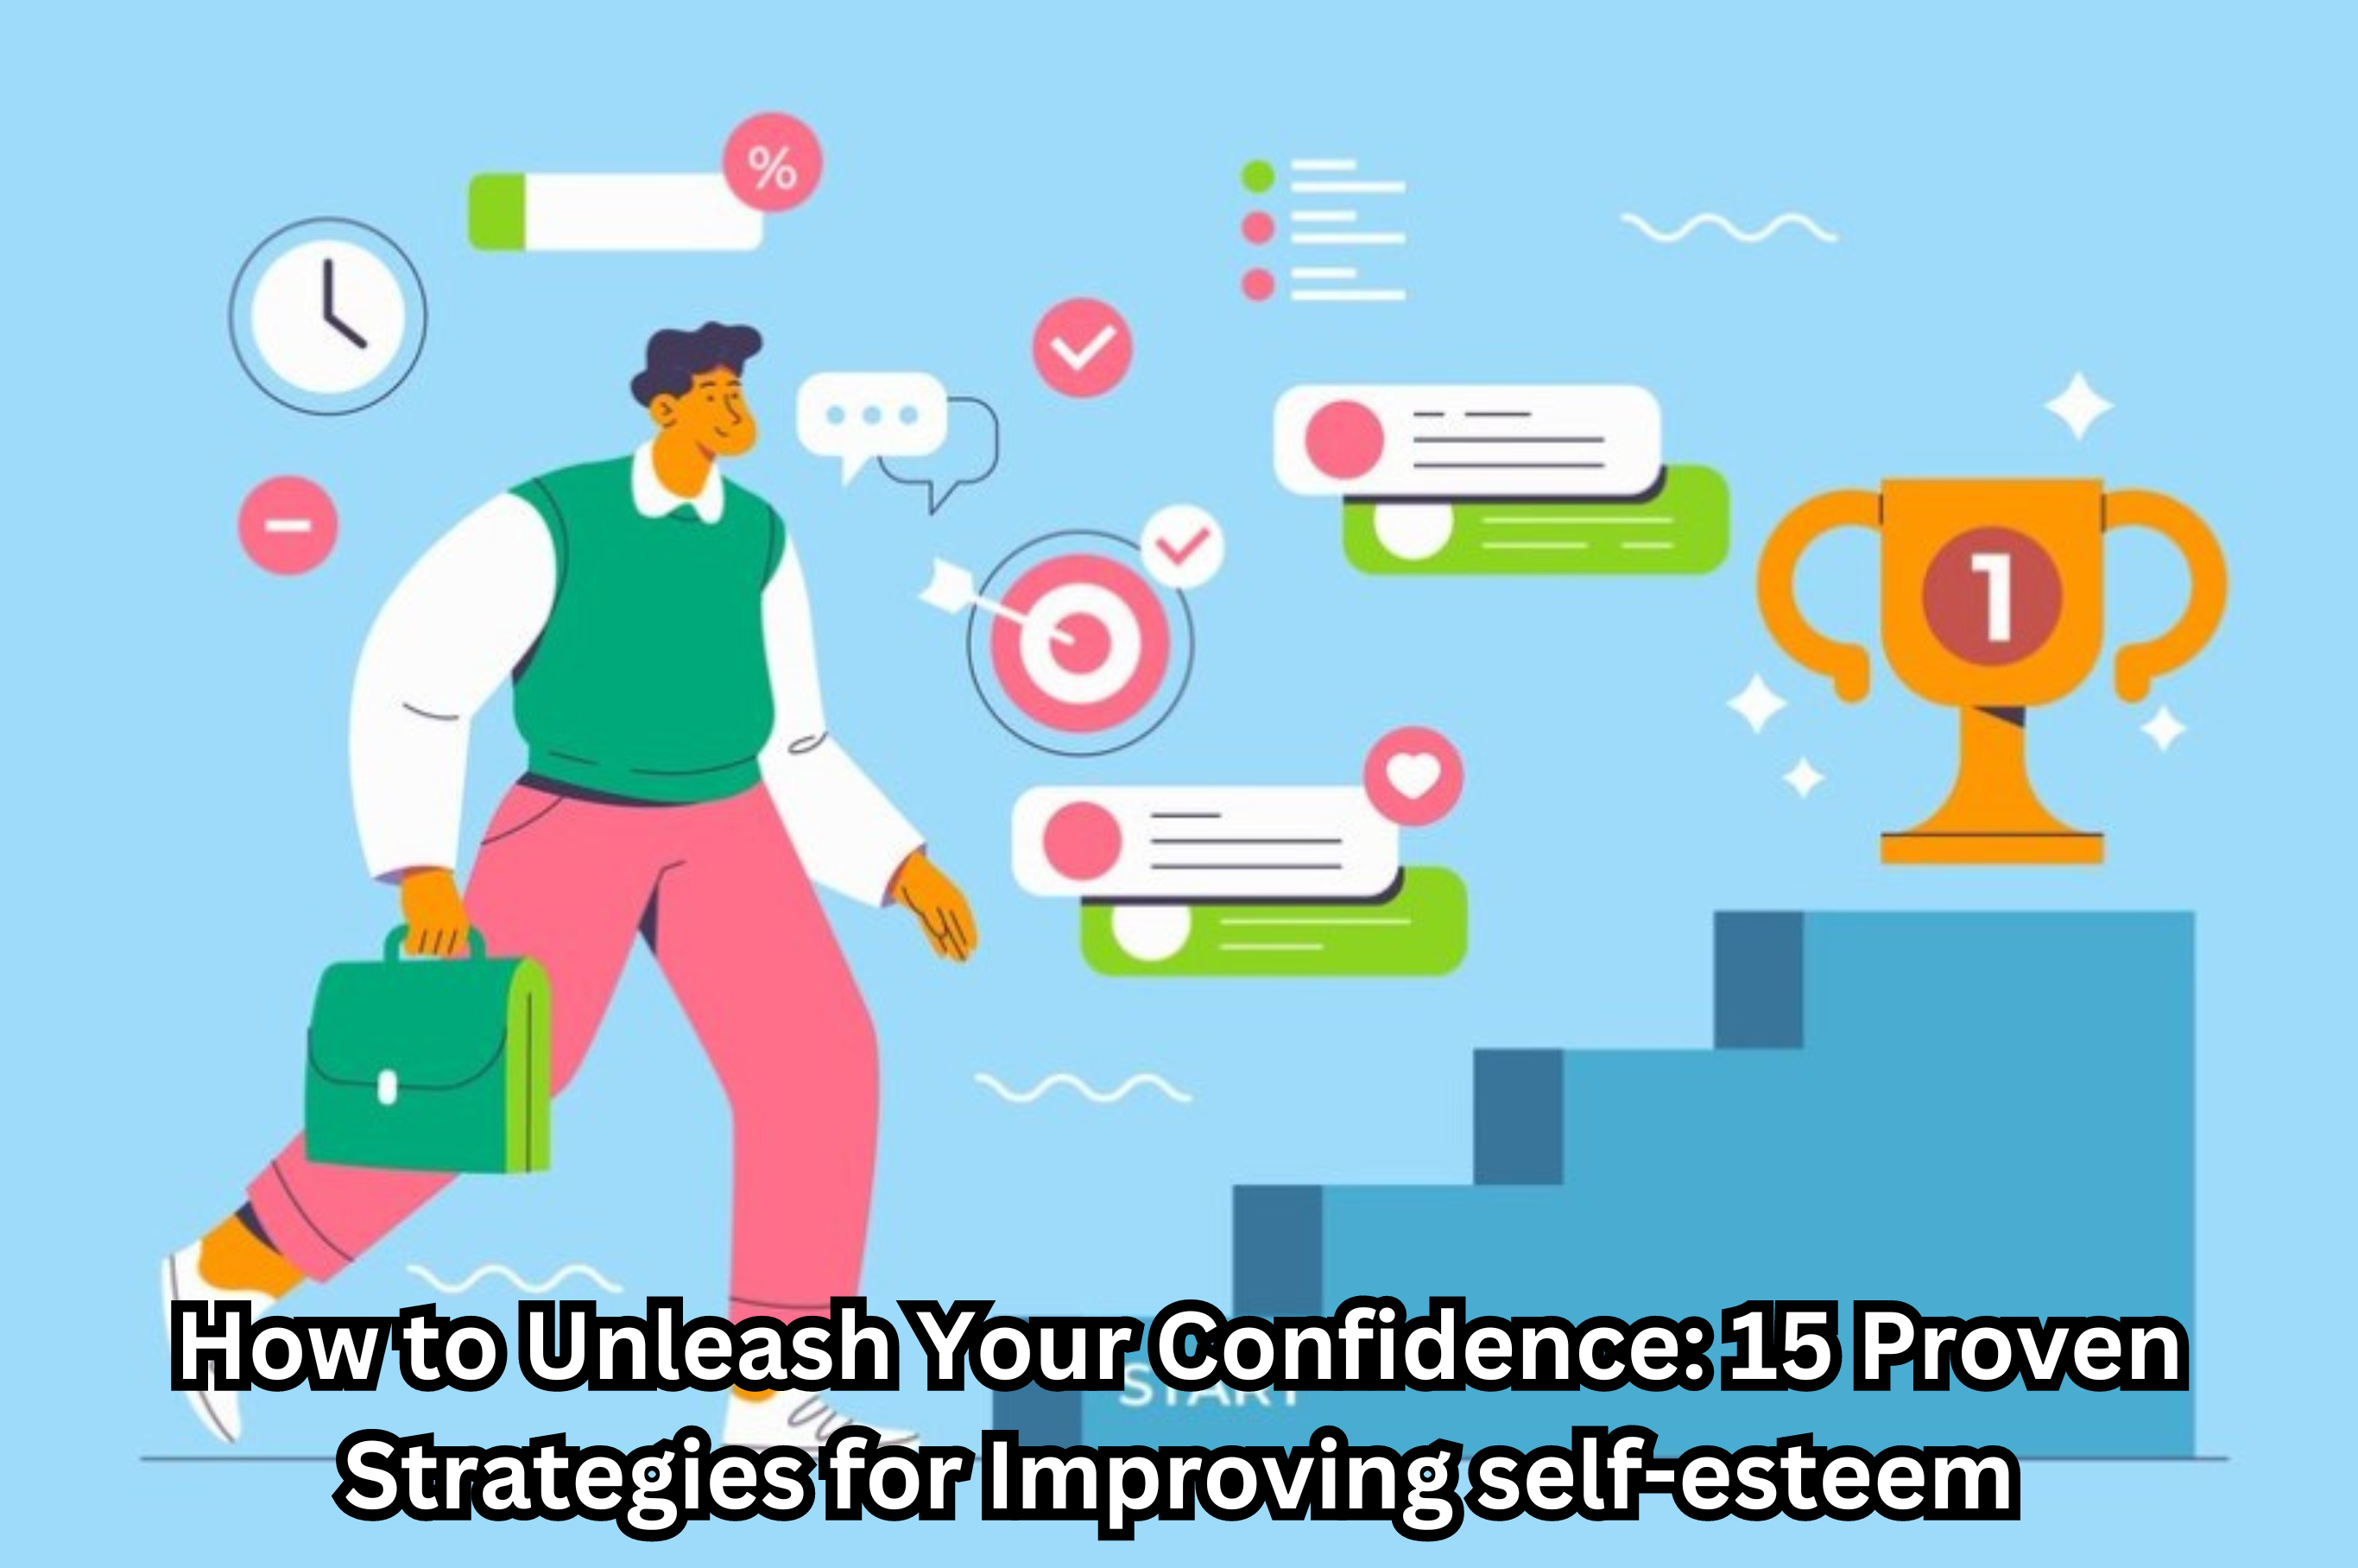 "Person confidently standing on mountain top, symbolizing improving self-esteem - 15 proven strategies